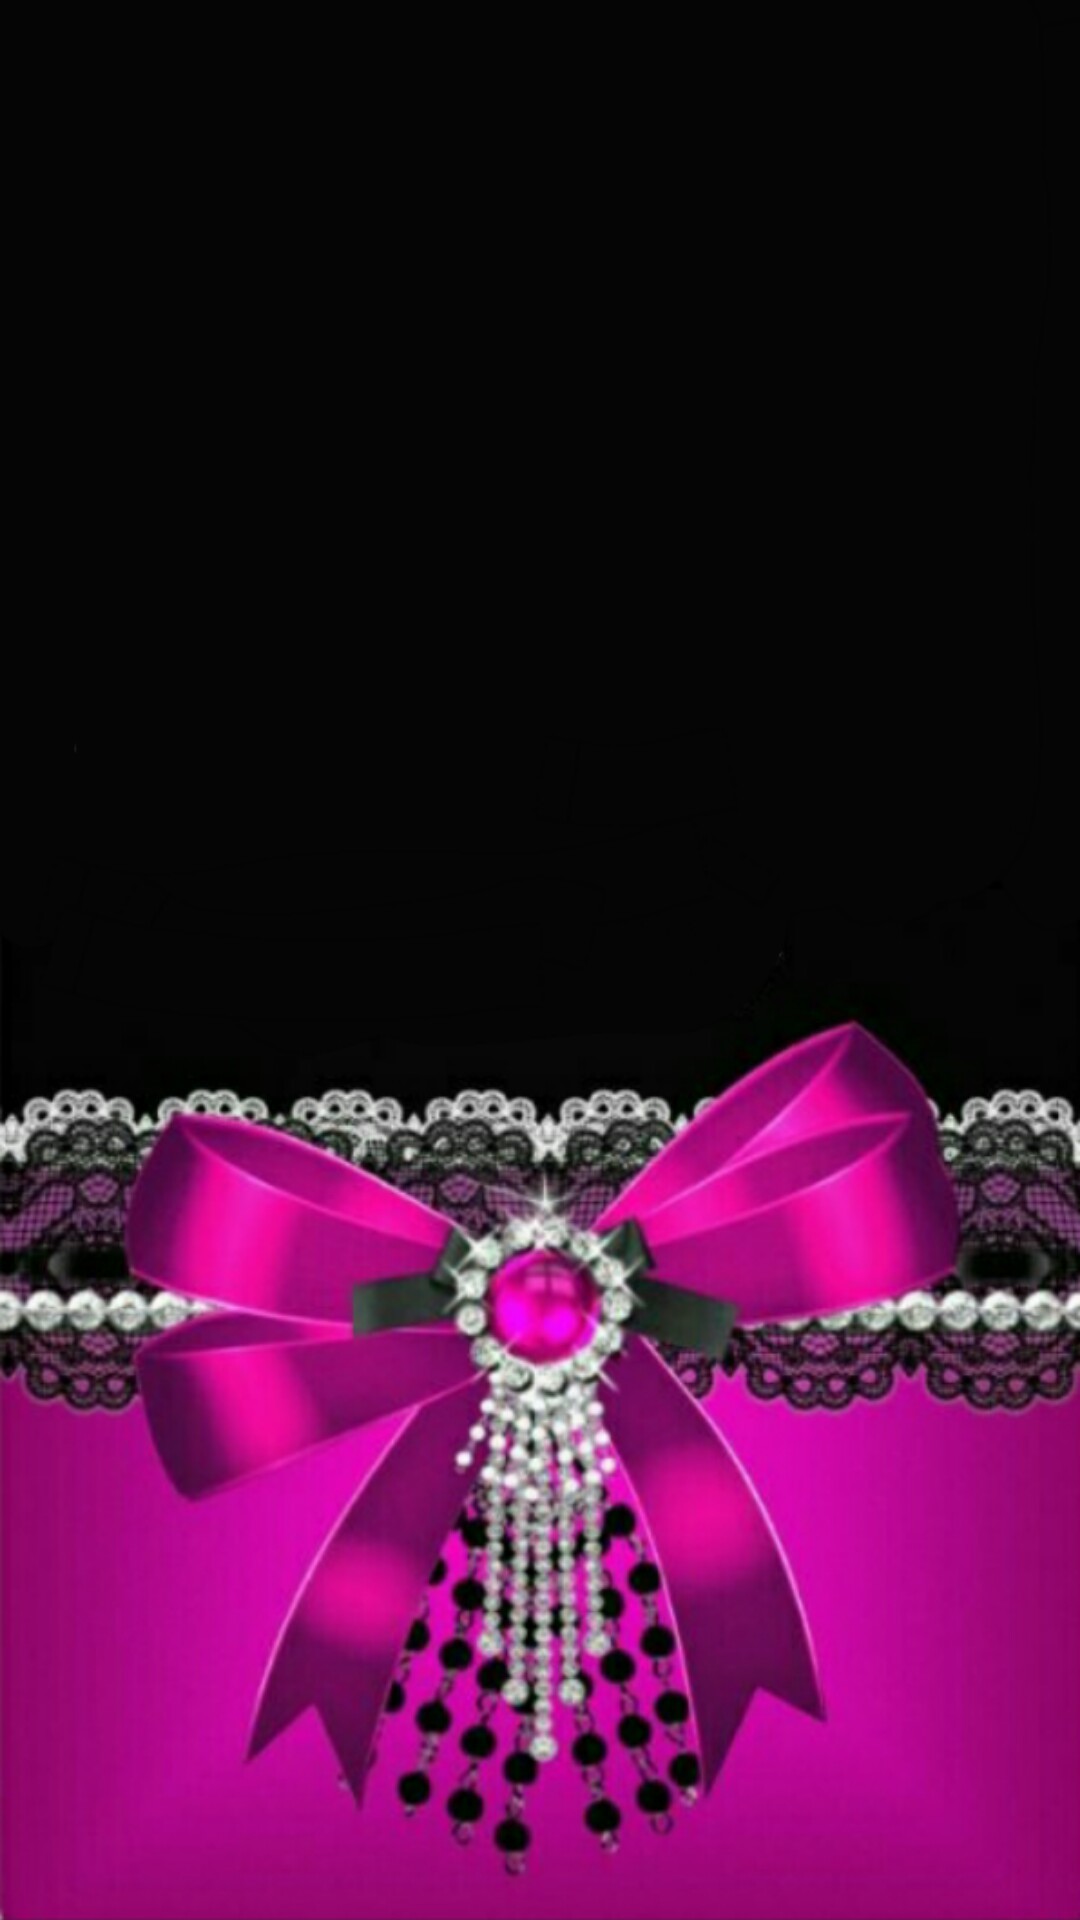 Black with Pink Bow Wallpaper